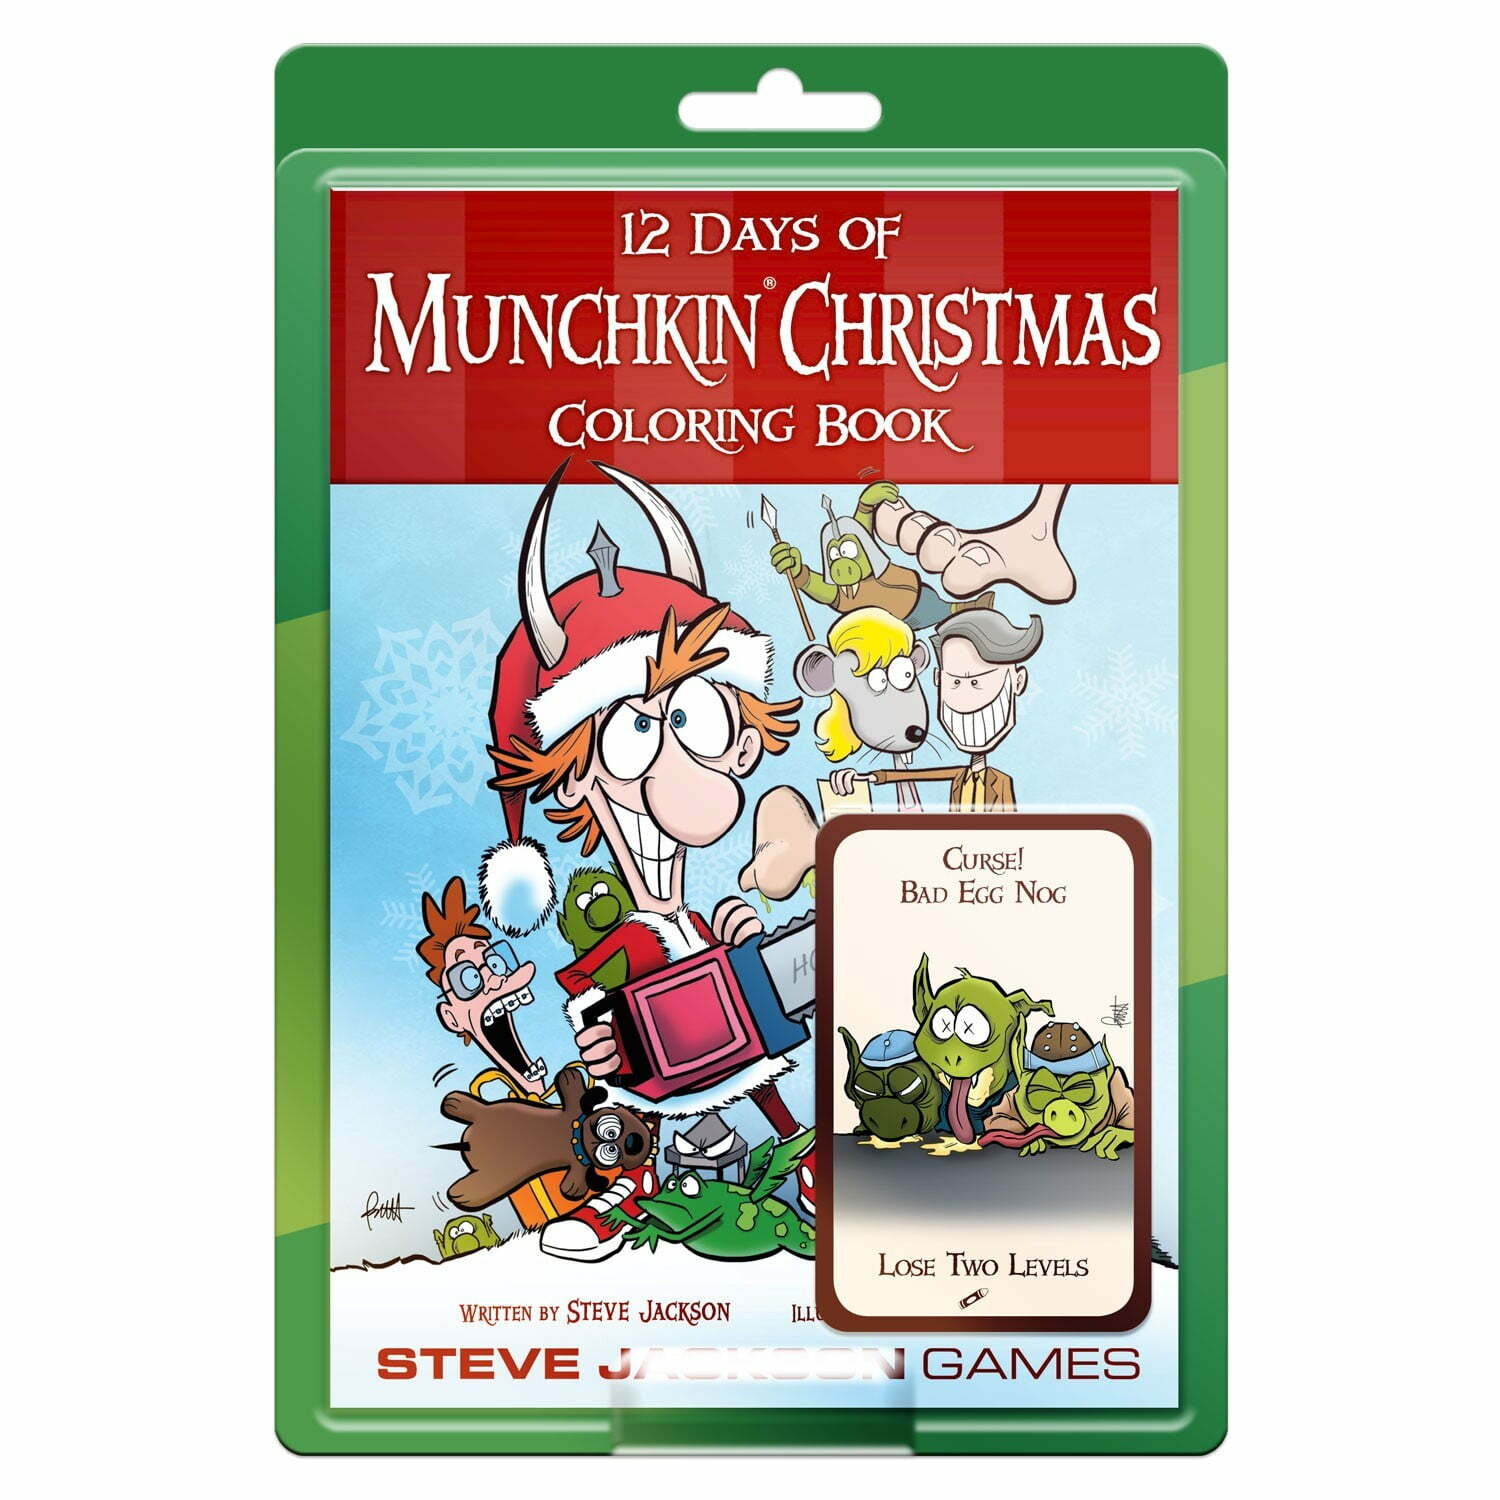 munchkin-12-days-of-christmas-coloring-book